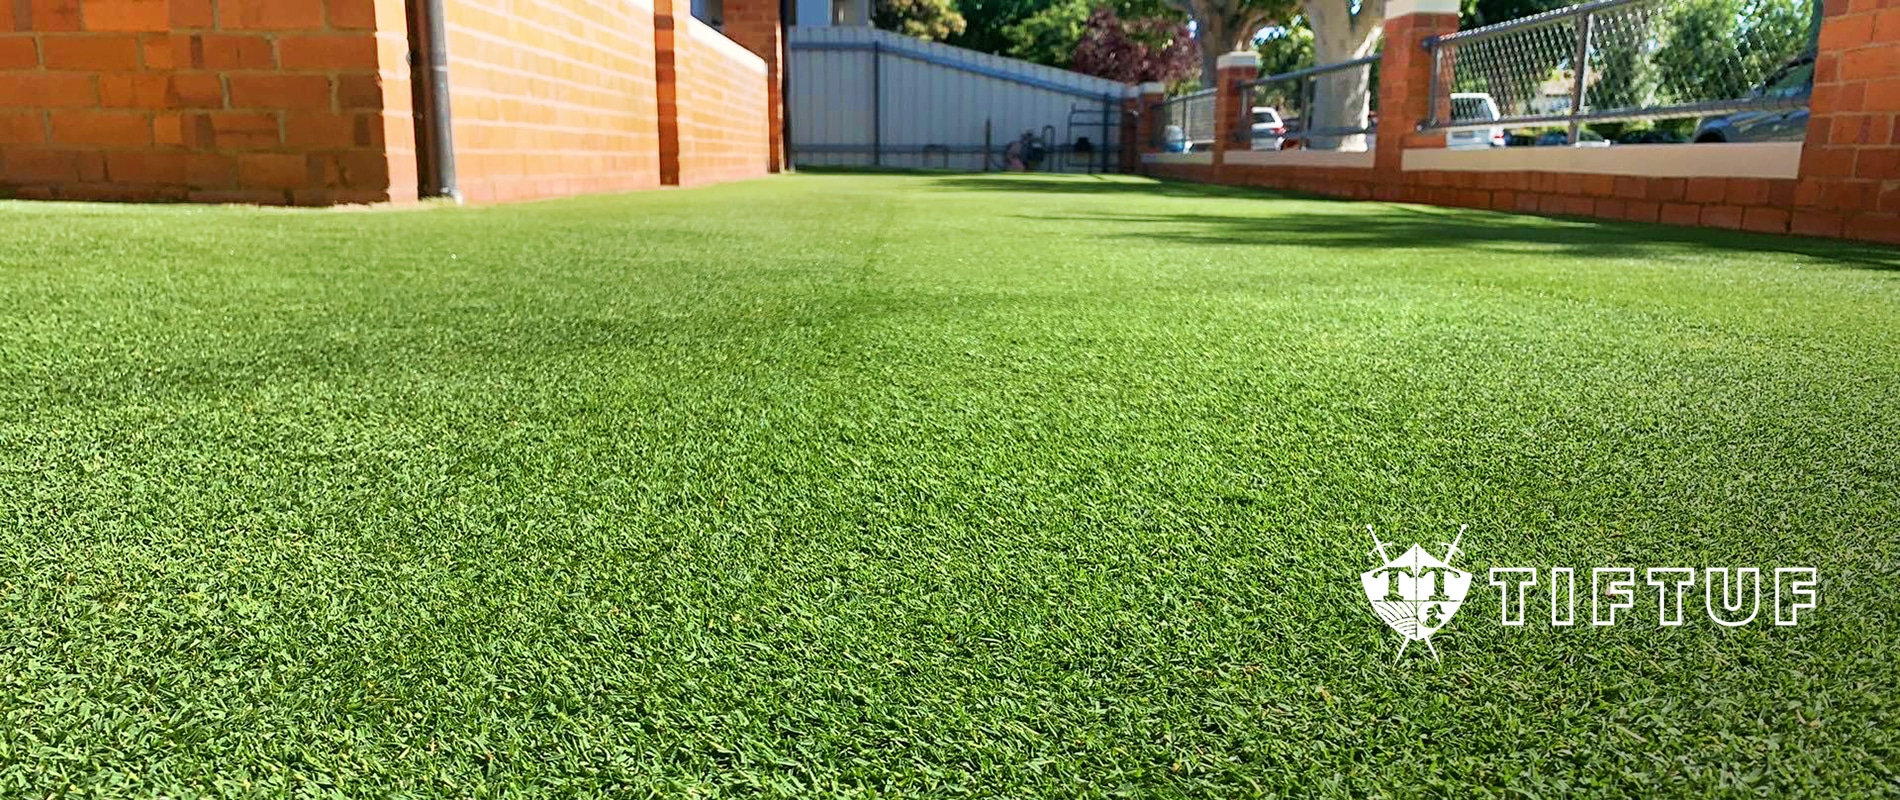 Image of TifTuf Bermuda Couch - The Perfect Lawn Solution by Parklea Sand and Soil.